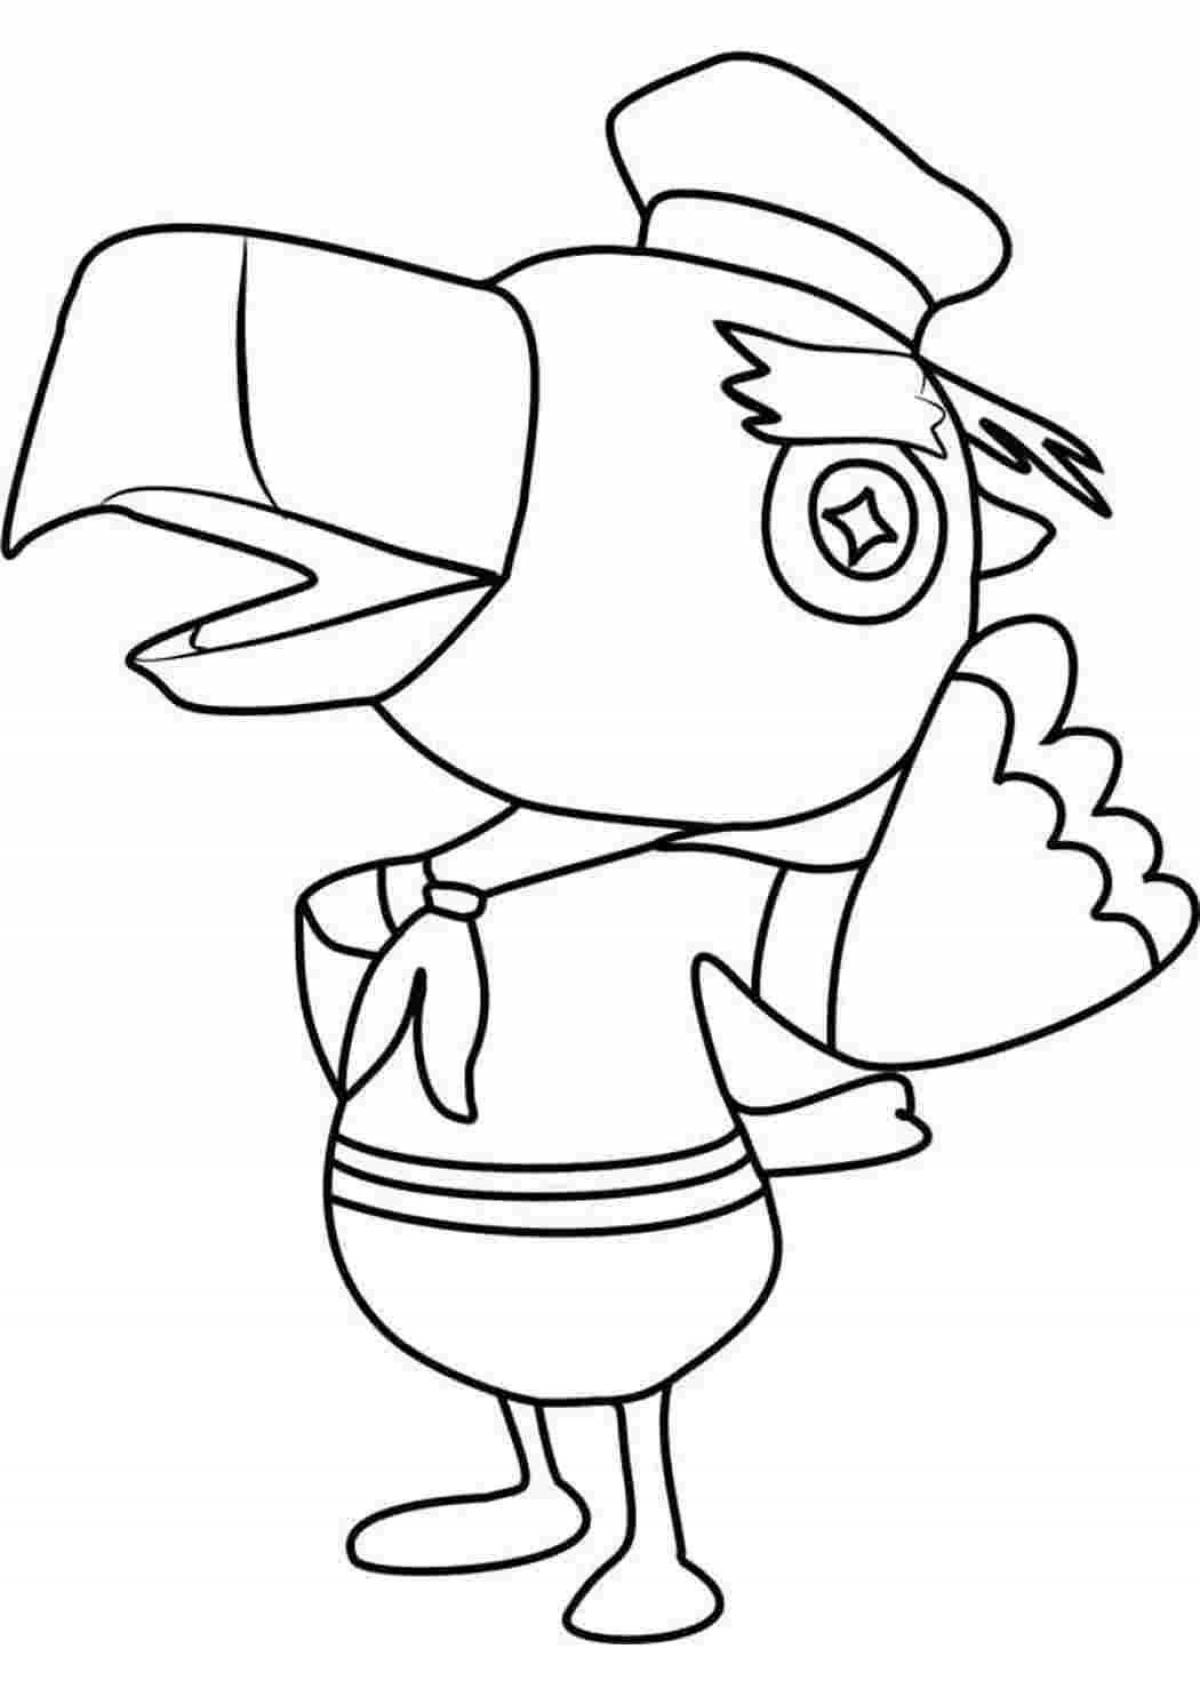 Delightful babriki coloring pages